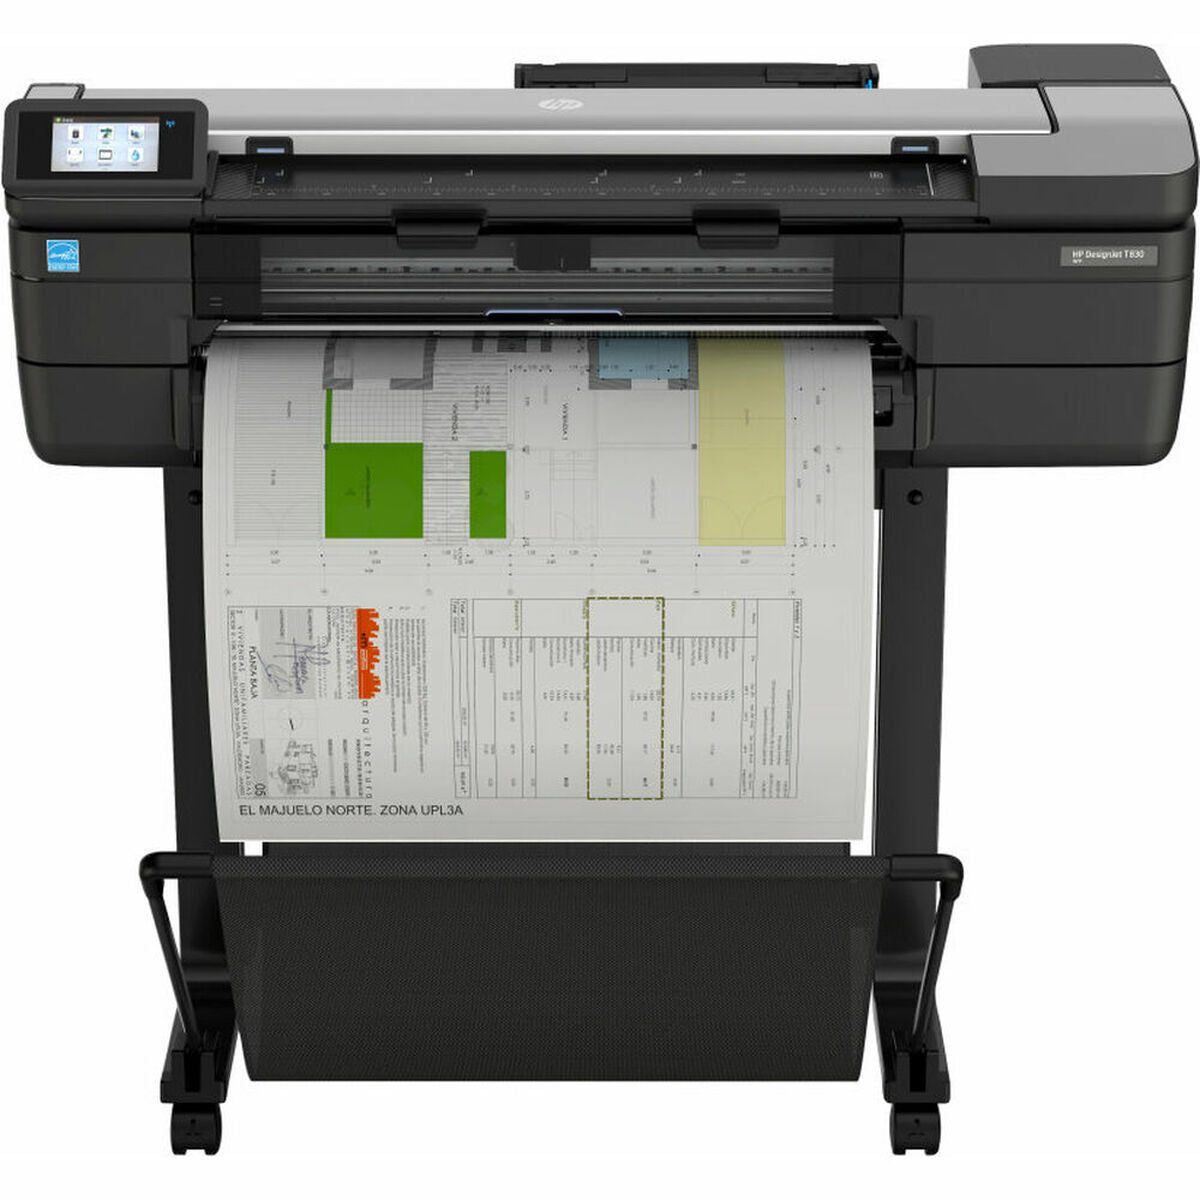 Multifunction Printer HP F9A28D#B19, HP, Computing, Printers and accessories, multifunction-printer-hp-f9a28d-b19, :Inkjet Printers, :Multifunction Printer, Brand_HP, category-reference-2609, category-reference-2642, category-reference-2645, category-reference-t-19685, category-reference-t-19911, category-reference-t-21378, computers / peripherals, Condition_NEW, office, Price_+ 1000, Teleworking, RiotNook